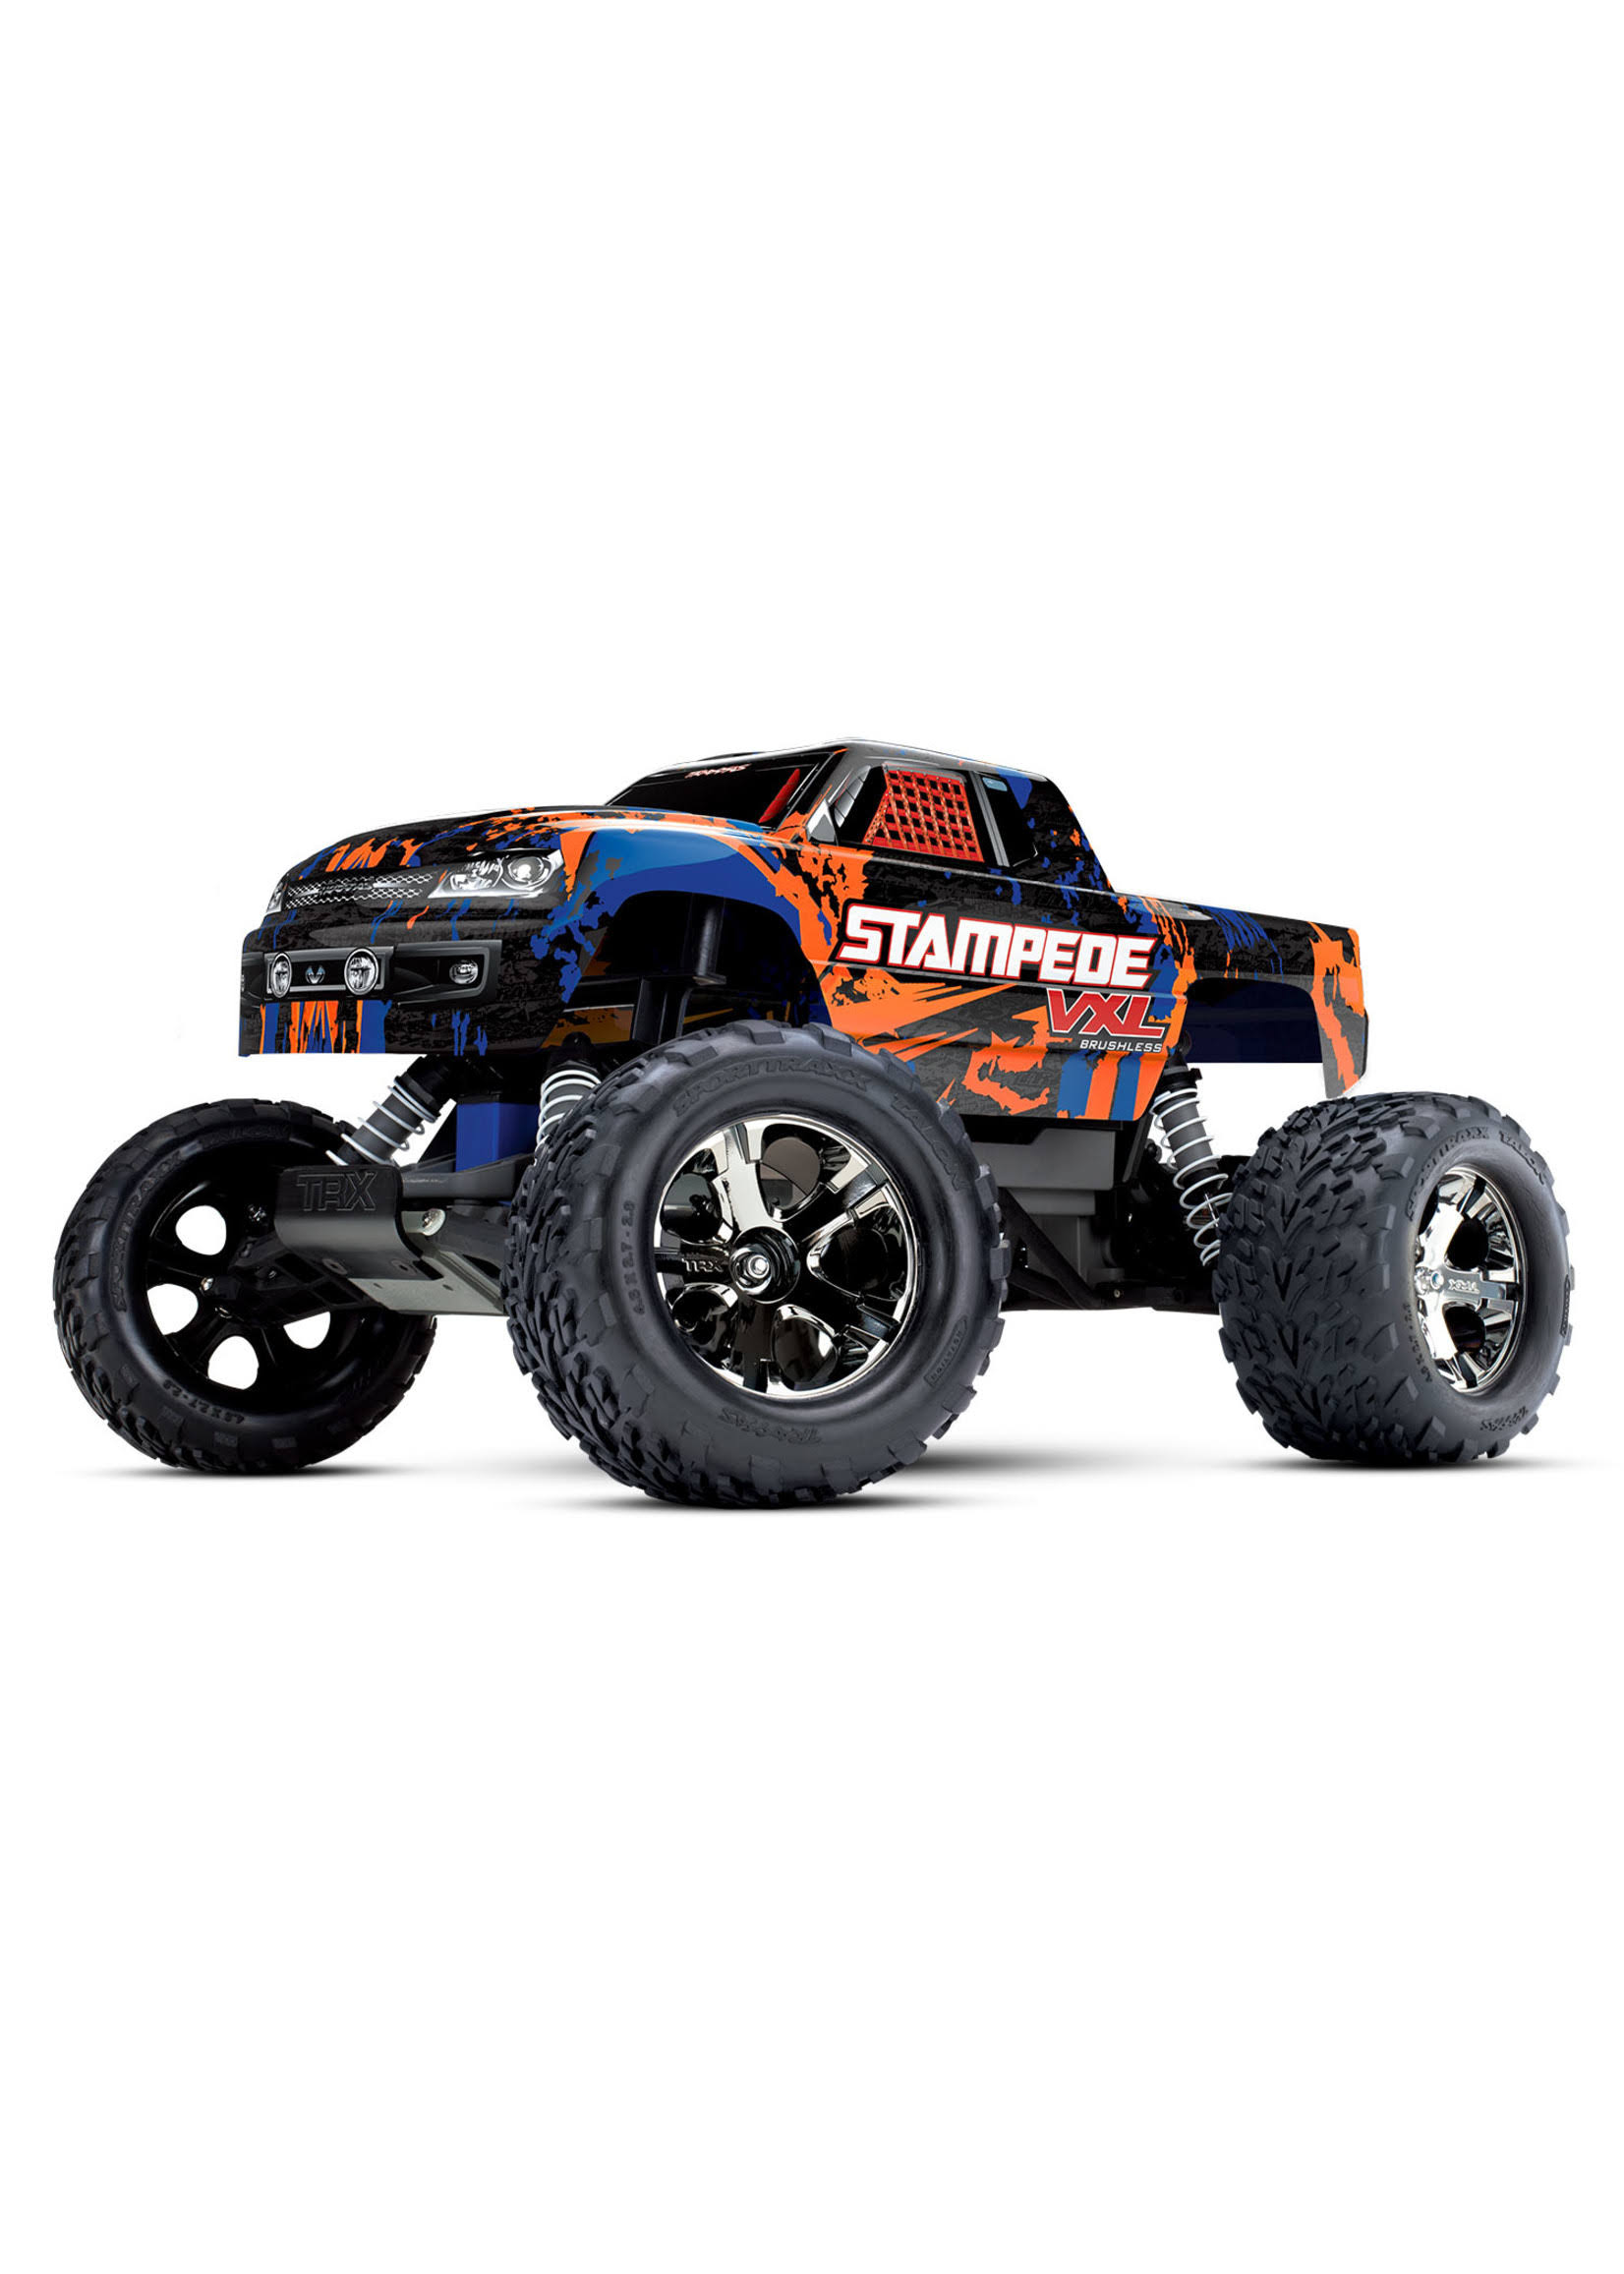 Traxxas Stampede VXL 1/10 Scale 2WD Brushless Monster Truck - Orange